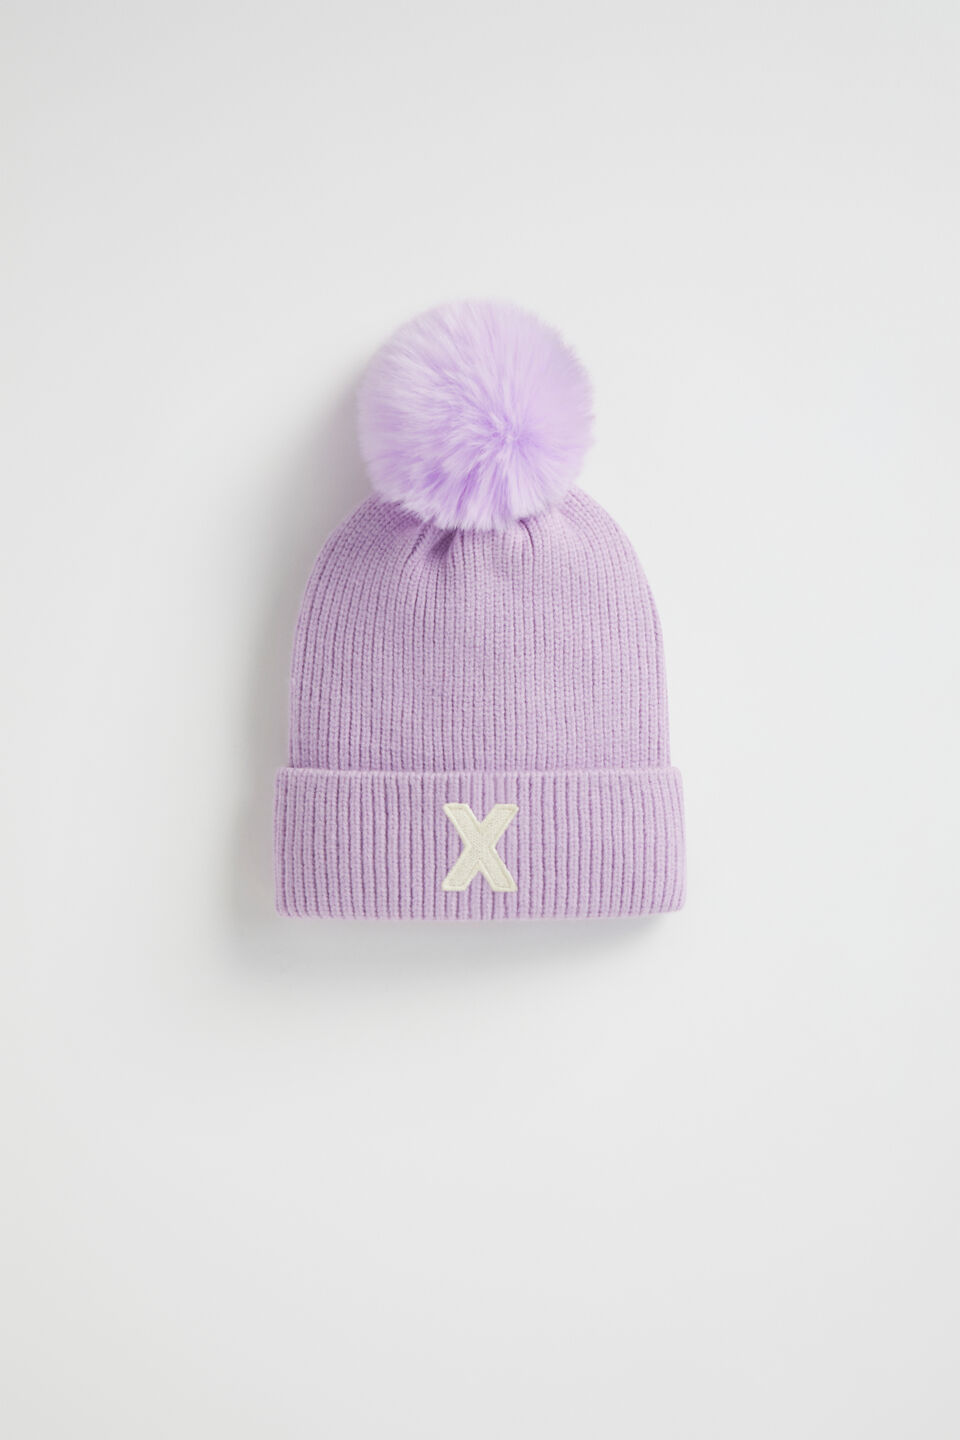 Embroidered Initial Beanie  X